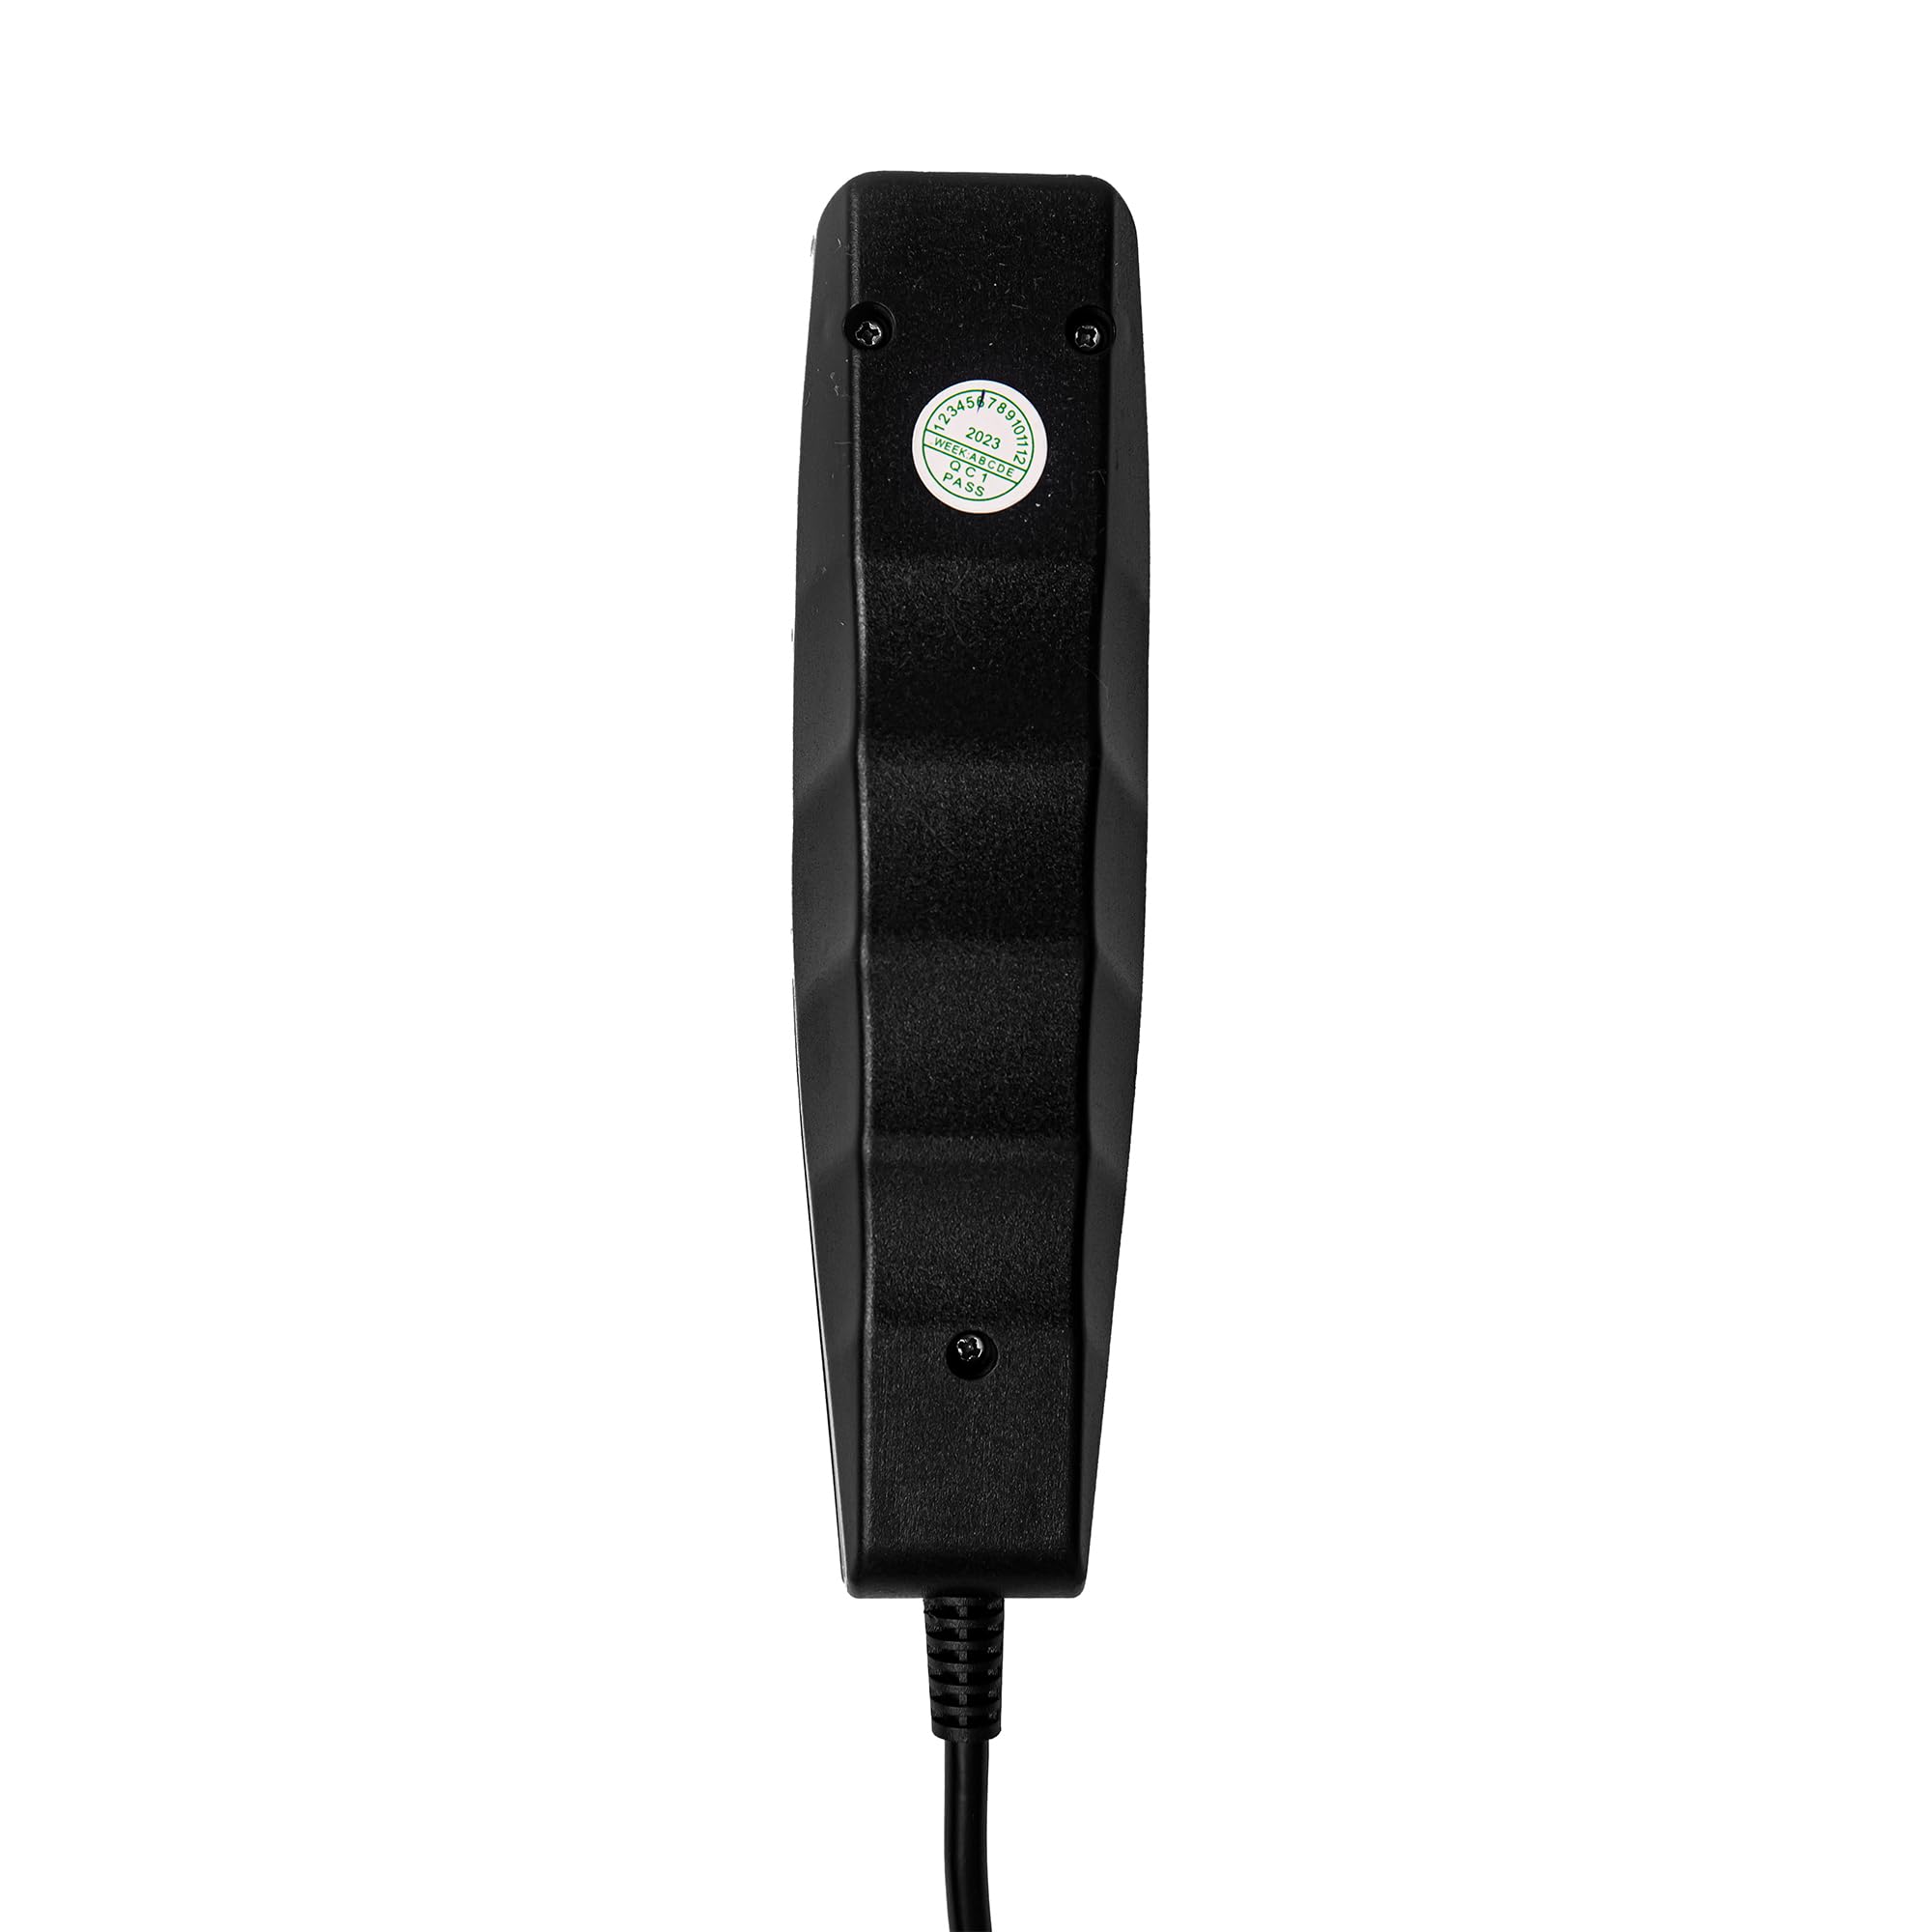 Fruhdi Lift Chairs Power Recliners 2 Button 5 Pin Remote Handset Controller Hand Control with USB and Backlight